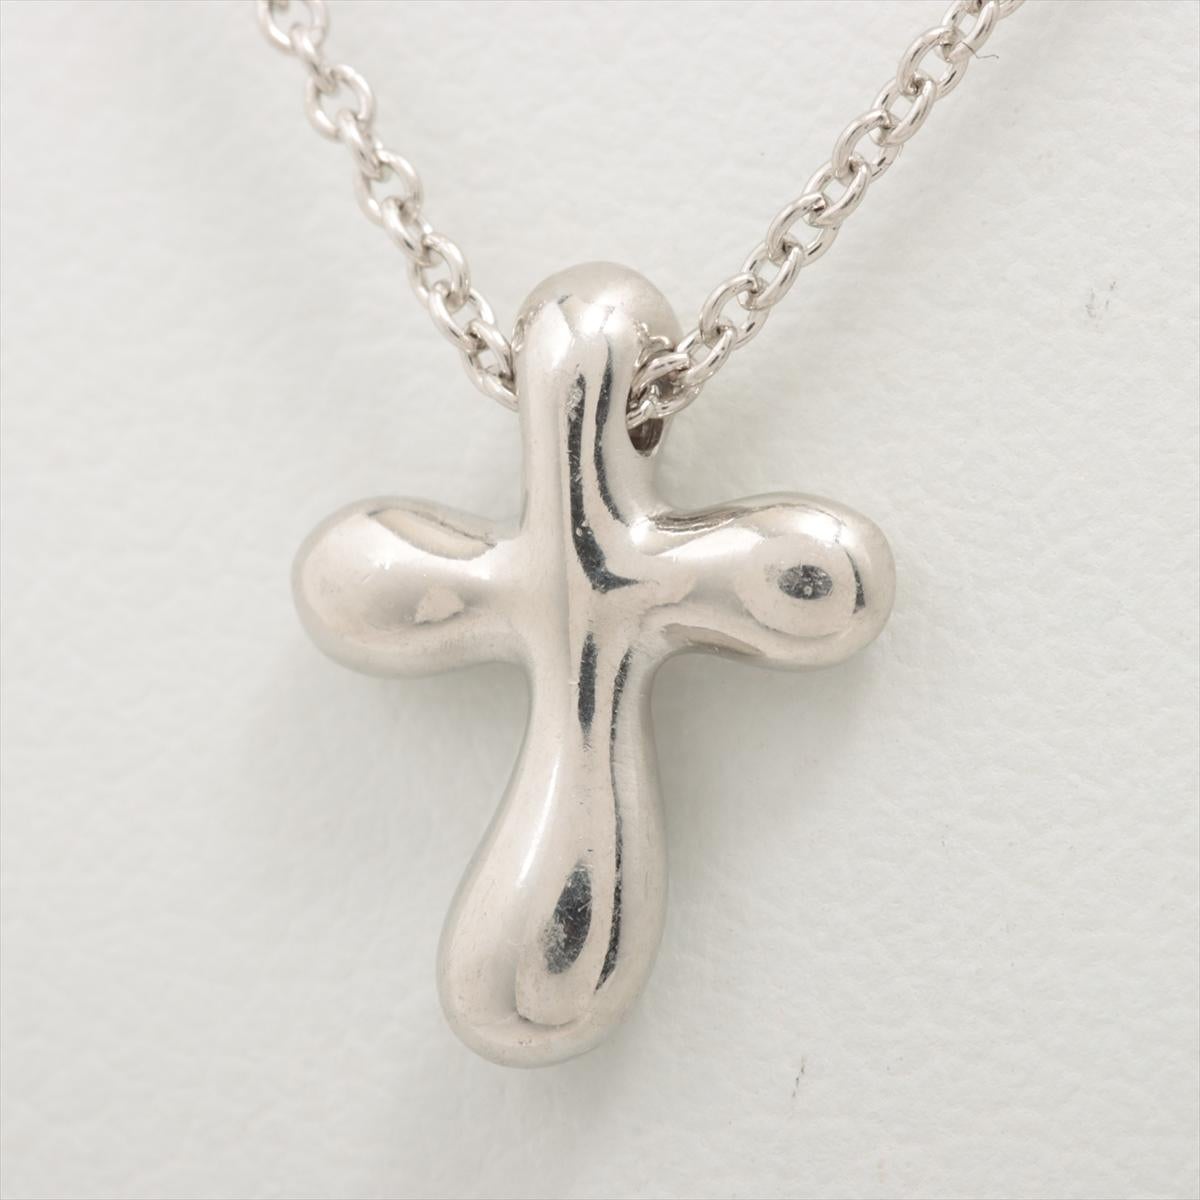 The Tiffany & Co. Small Cross Pendant Necklace in Platinum is a timeless and elegant piece of jewelry that embodies grace and sophistication. Crafted from high-quality platinum, the necklace features a small cross pendant suspended from a delicate